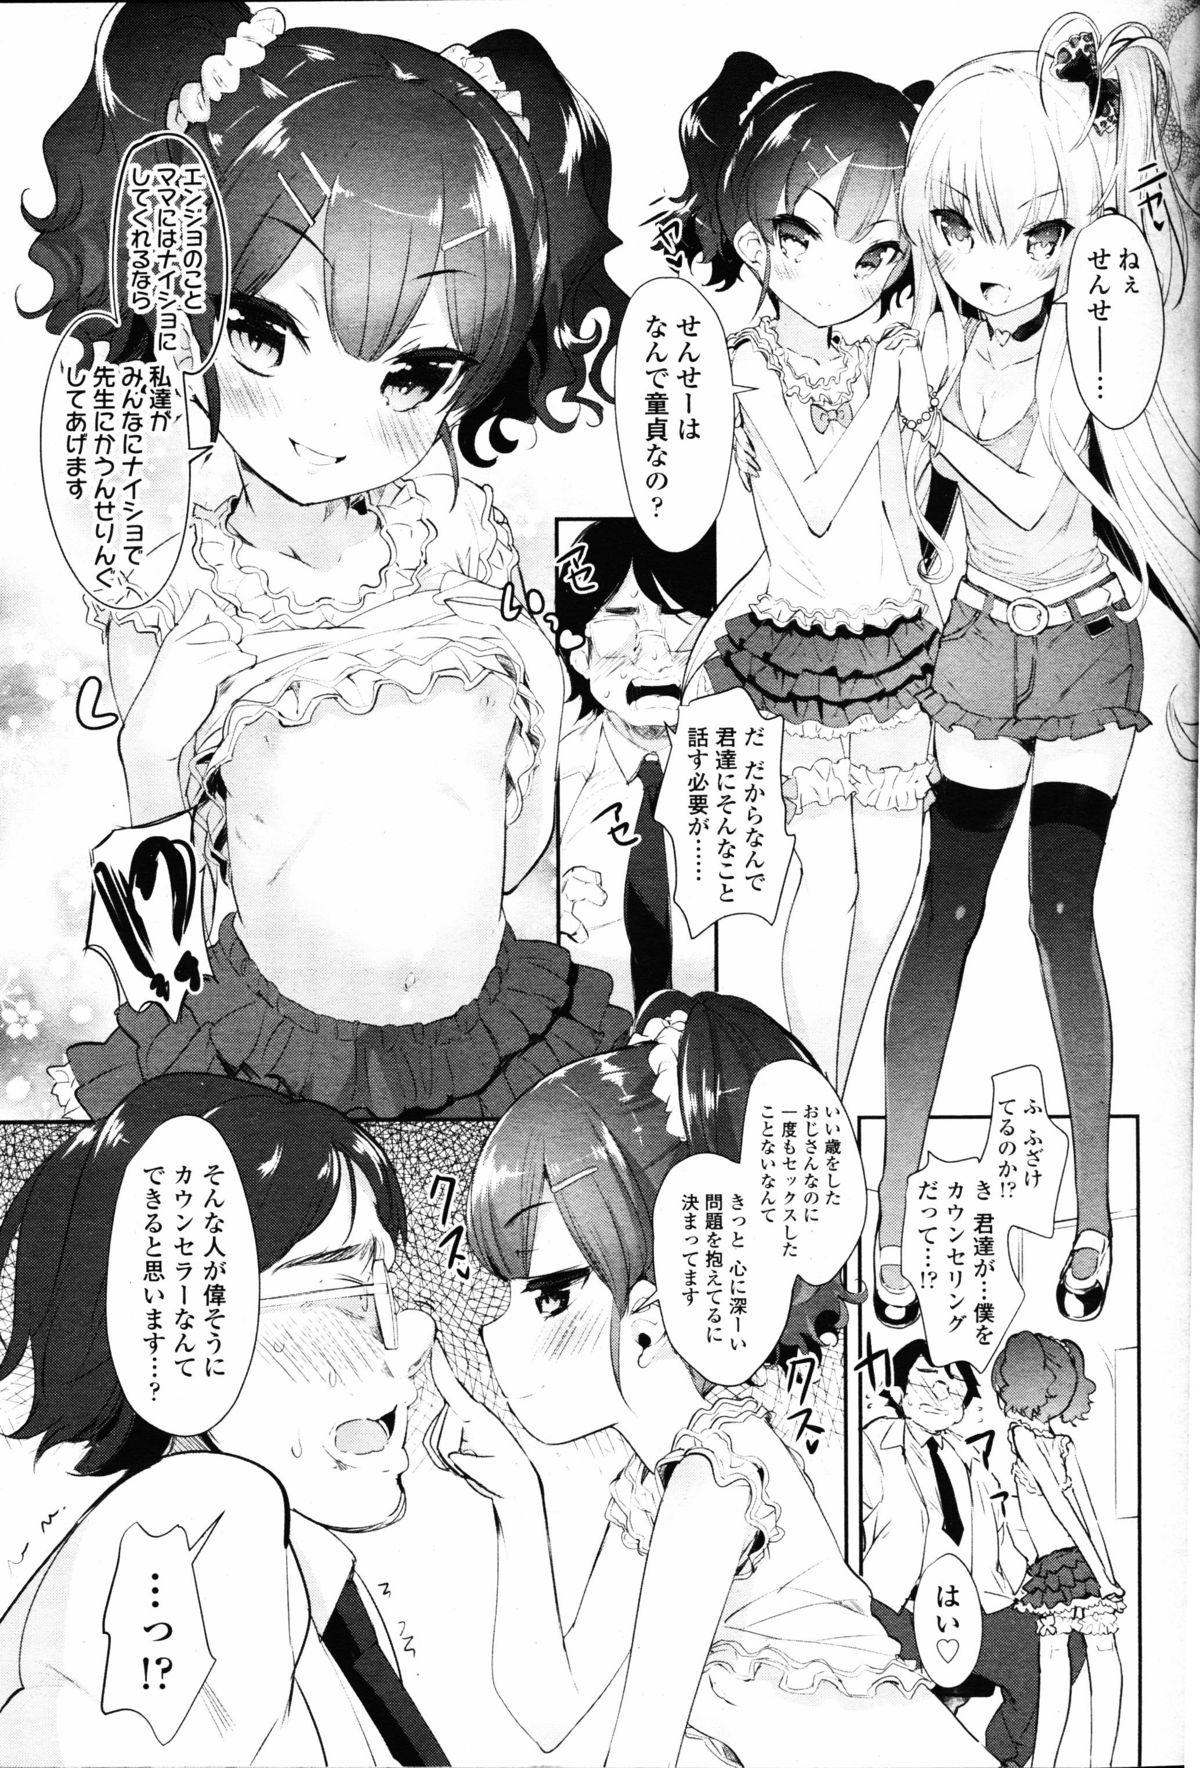 Relax Girls forM Vol. 11 Staxxx - Page 6